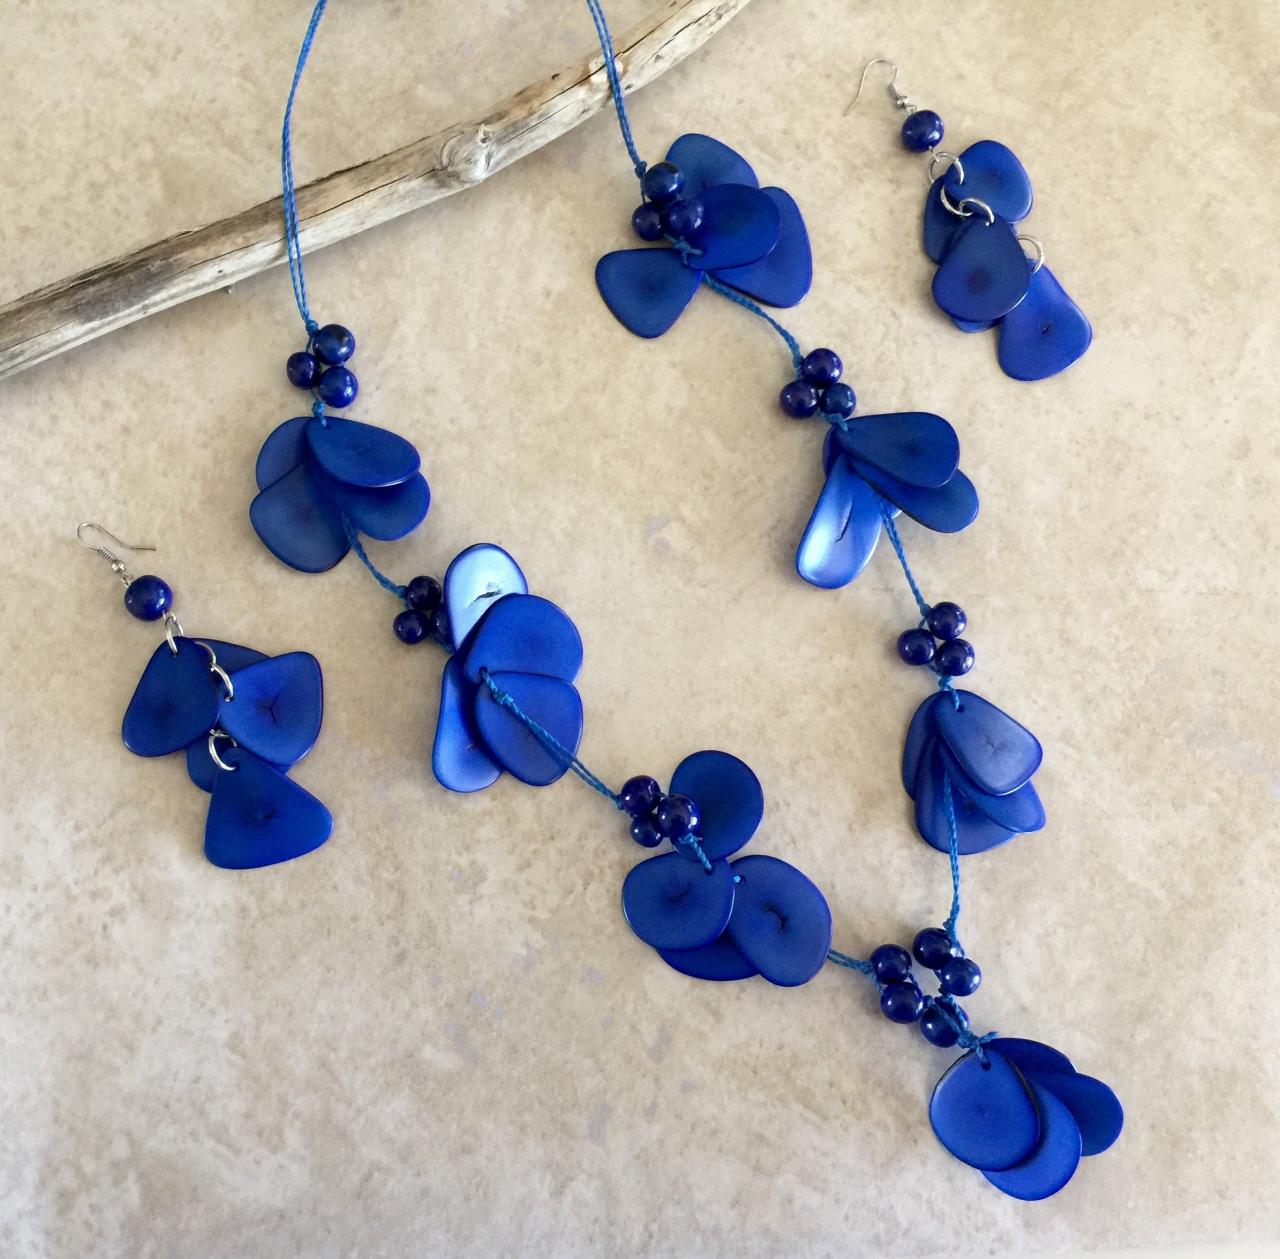 !blue Tagua Nut Necklace And Earrings, Statement Necklace, Handmade Necklace, Seeds Necklace, Summery Neck, Ecofriendly Necklace, Exotic